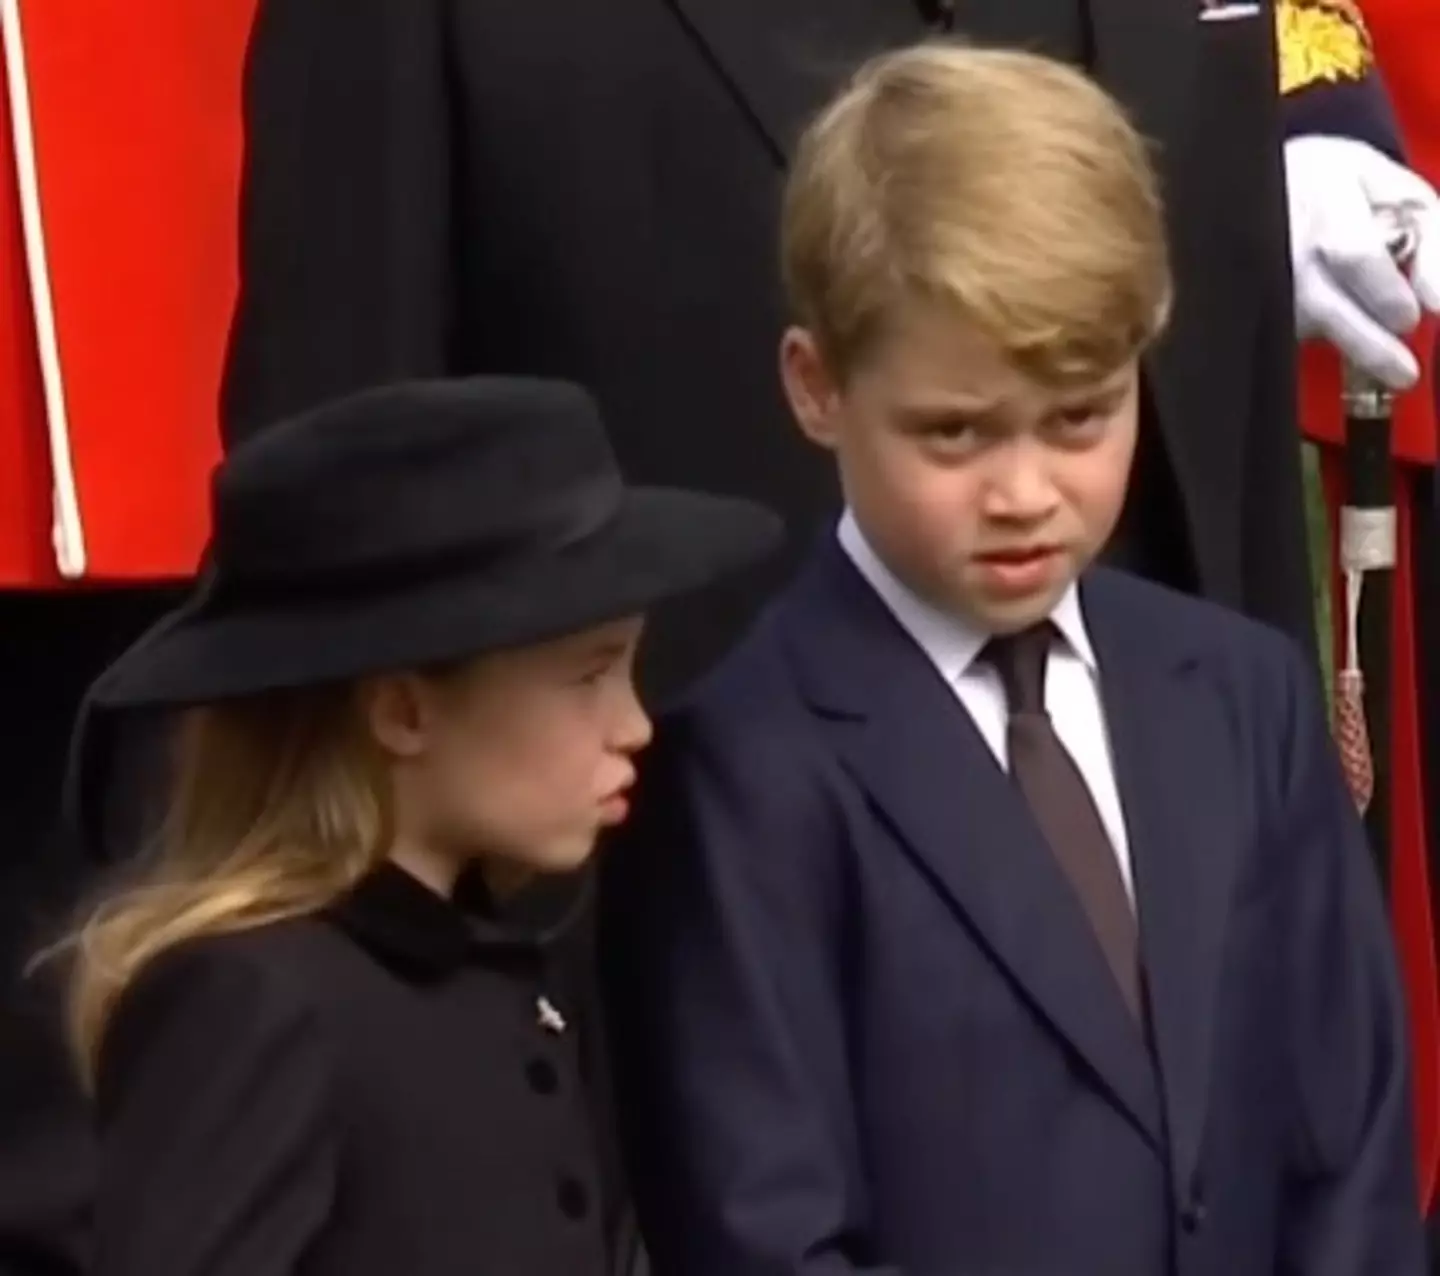 Princess Charlotte with Prince George at the Queen's funeral.